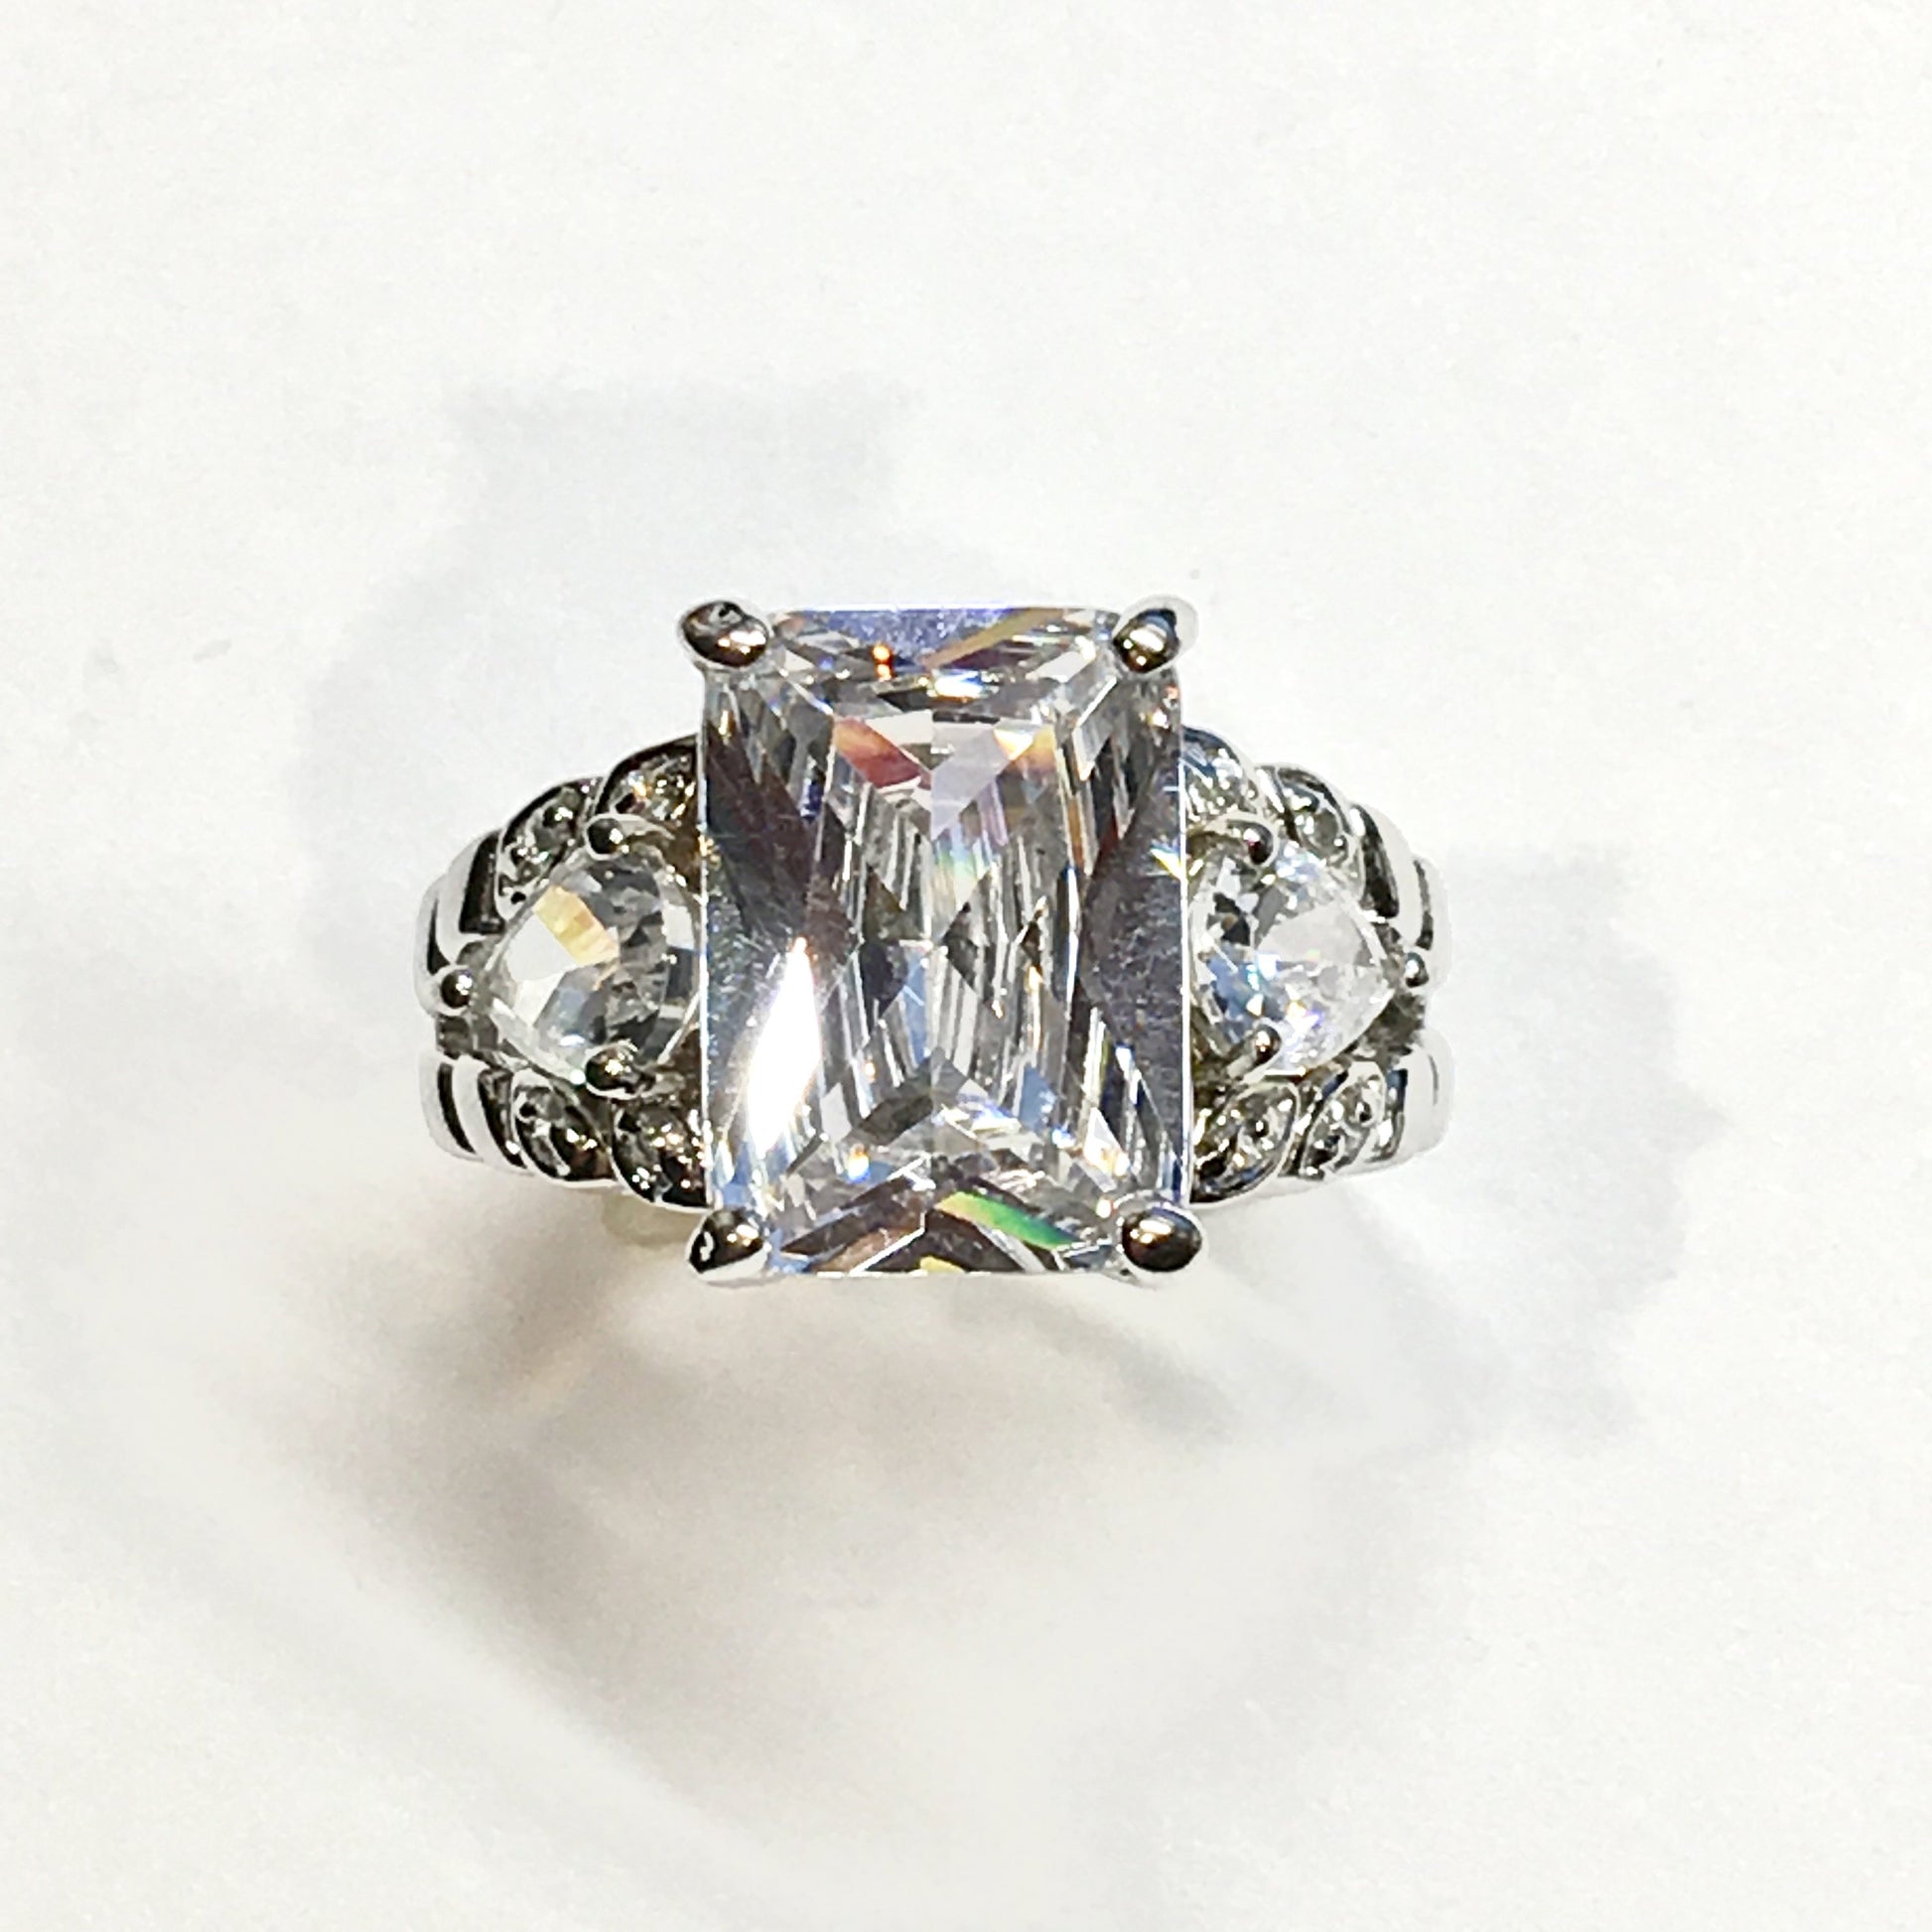 Ring - Womens Sterling Silver Shimmery, Striking Cocktail Ring - Emerald Cut Cz Stone Ring - Discount Estate Jewelry